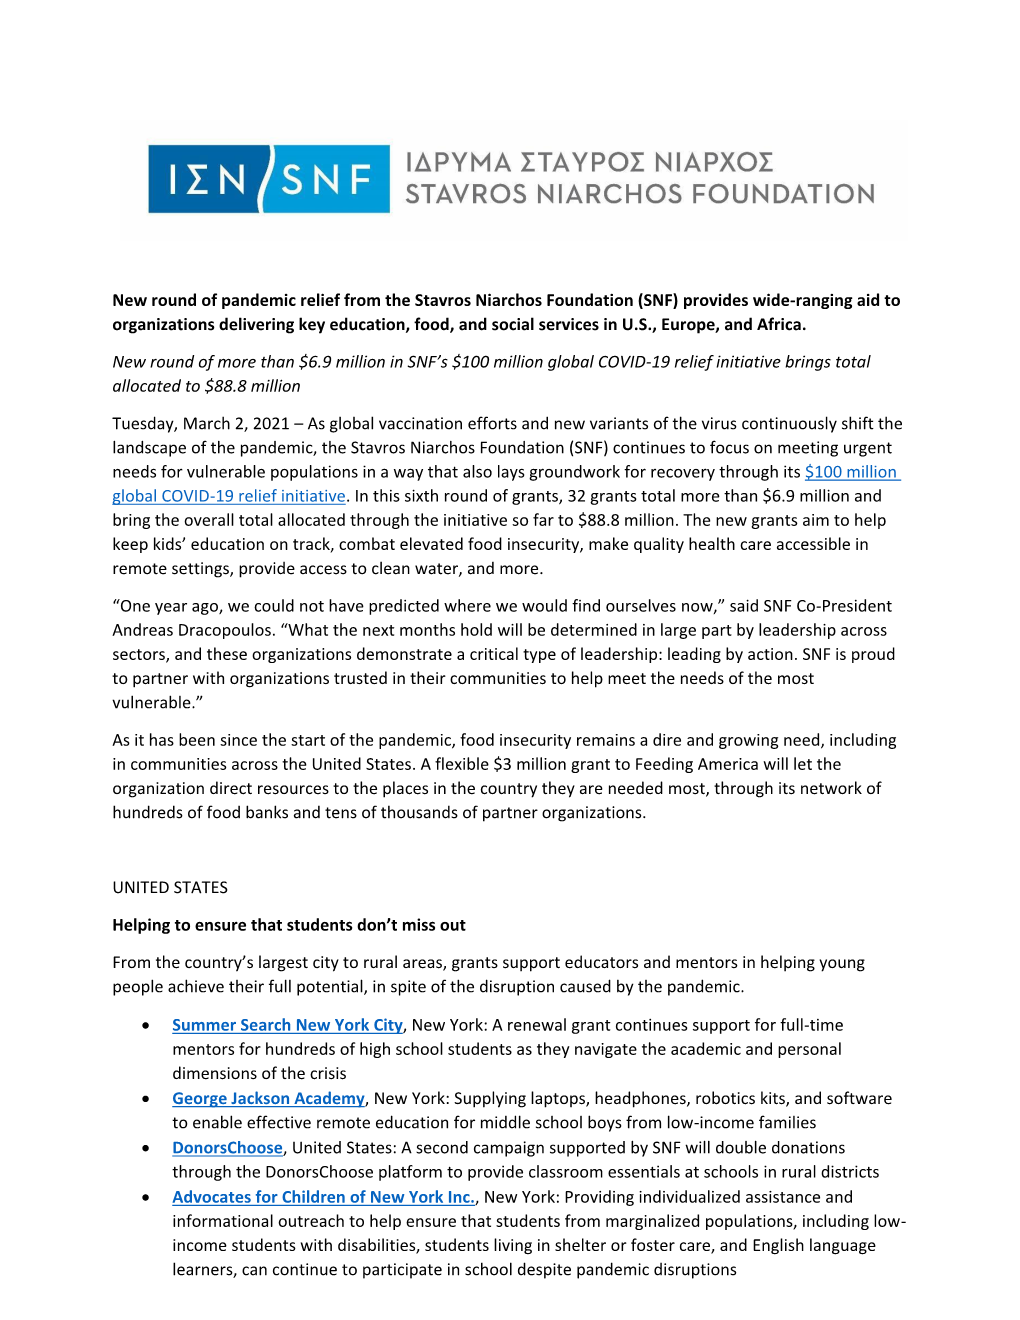 New Round of Pandemic Relief from the Stavros Niarchos Foundation (SNF) Provides Wide-Ranging Aid to Organizations Delivering Ke